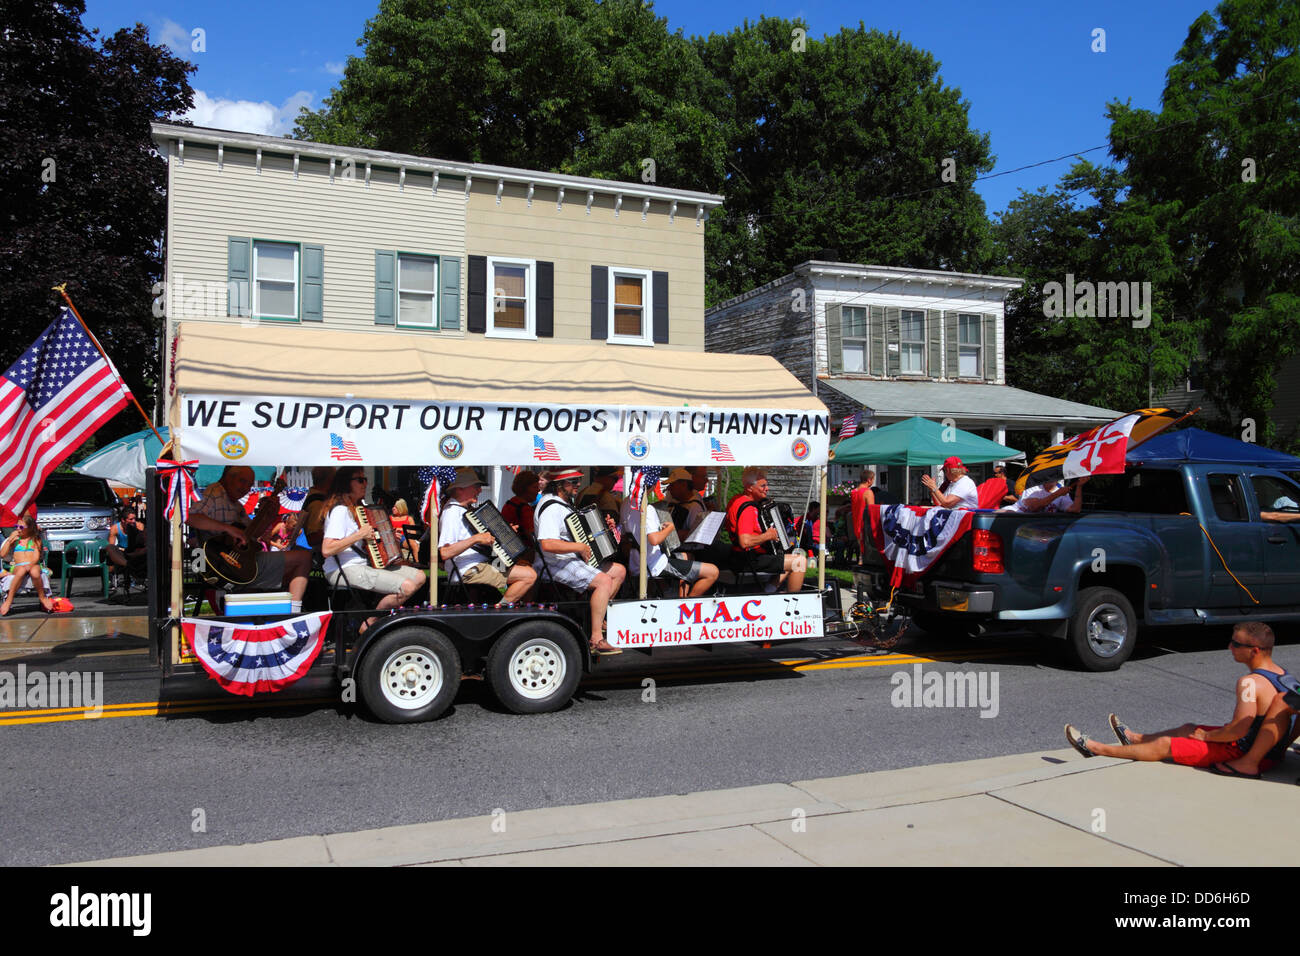 Maryland Accordion Club show support for troops in Afghanistan during 4th of July Independence Day parades, Catonsville, Maryland, USA Stock Photo